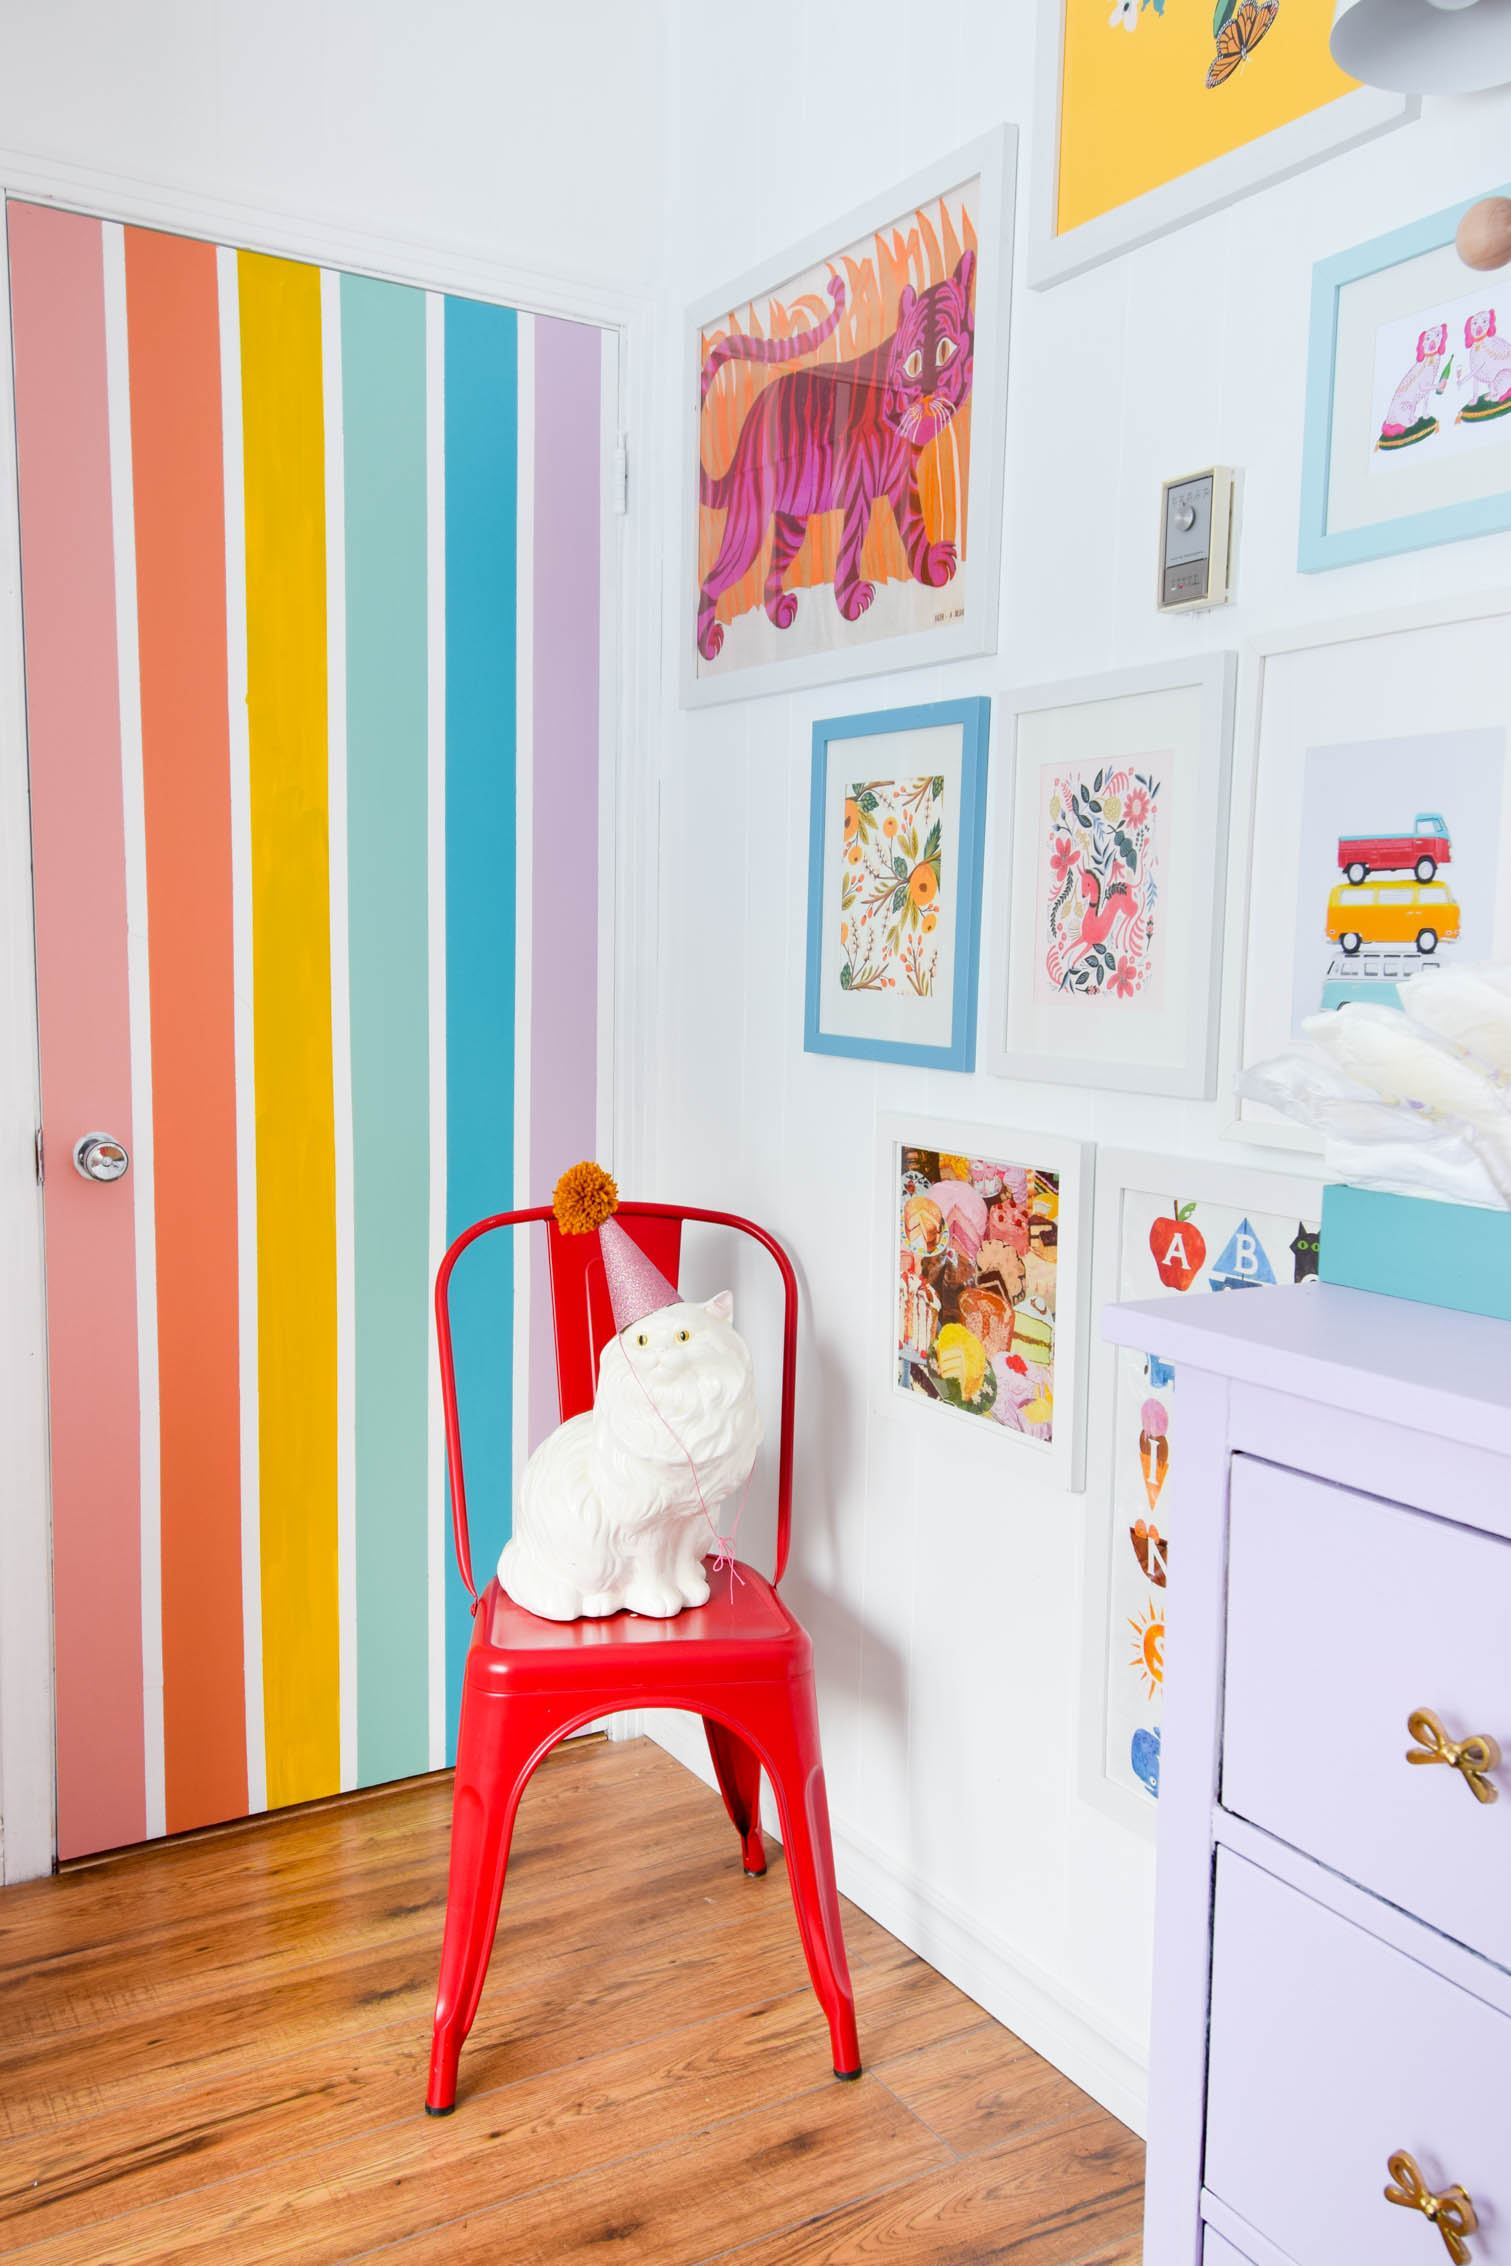 A DIY rainbow nursery door is how you nail two trends in one project! Get rainbows and murals all in one, and add a major pop of color to any space.